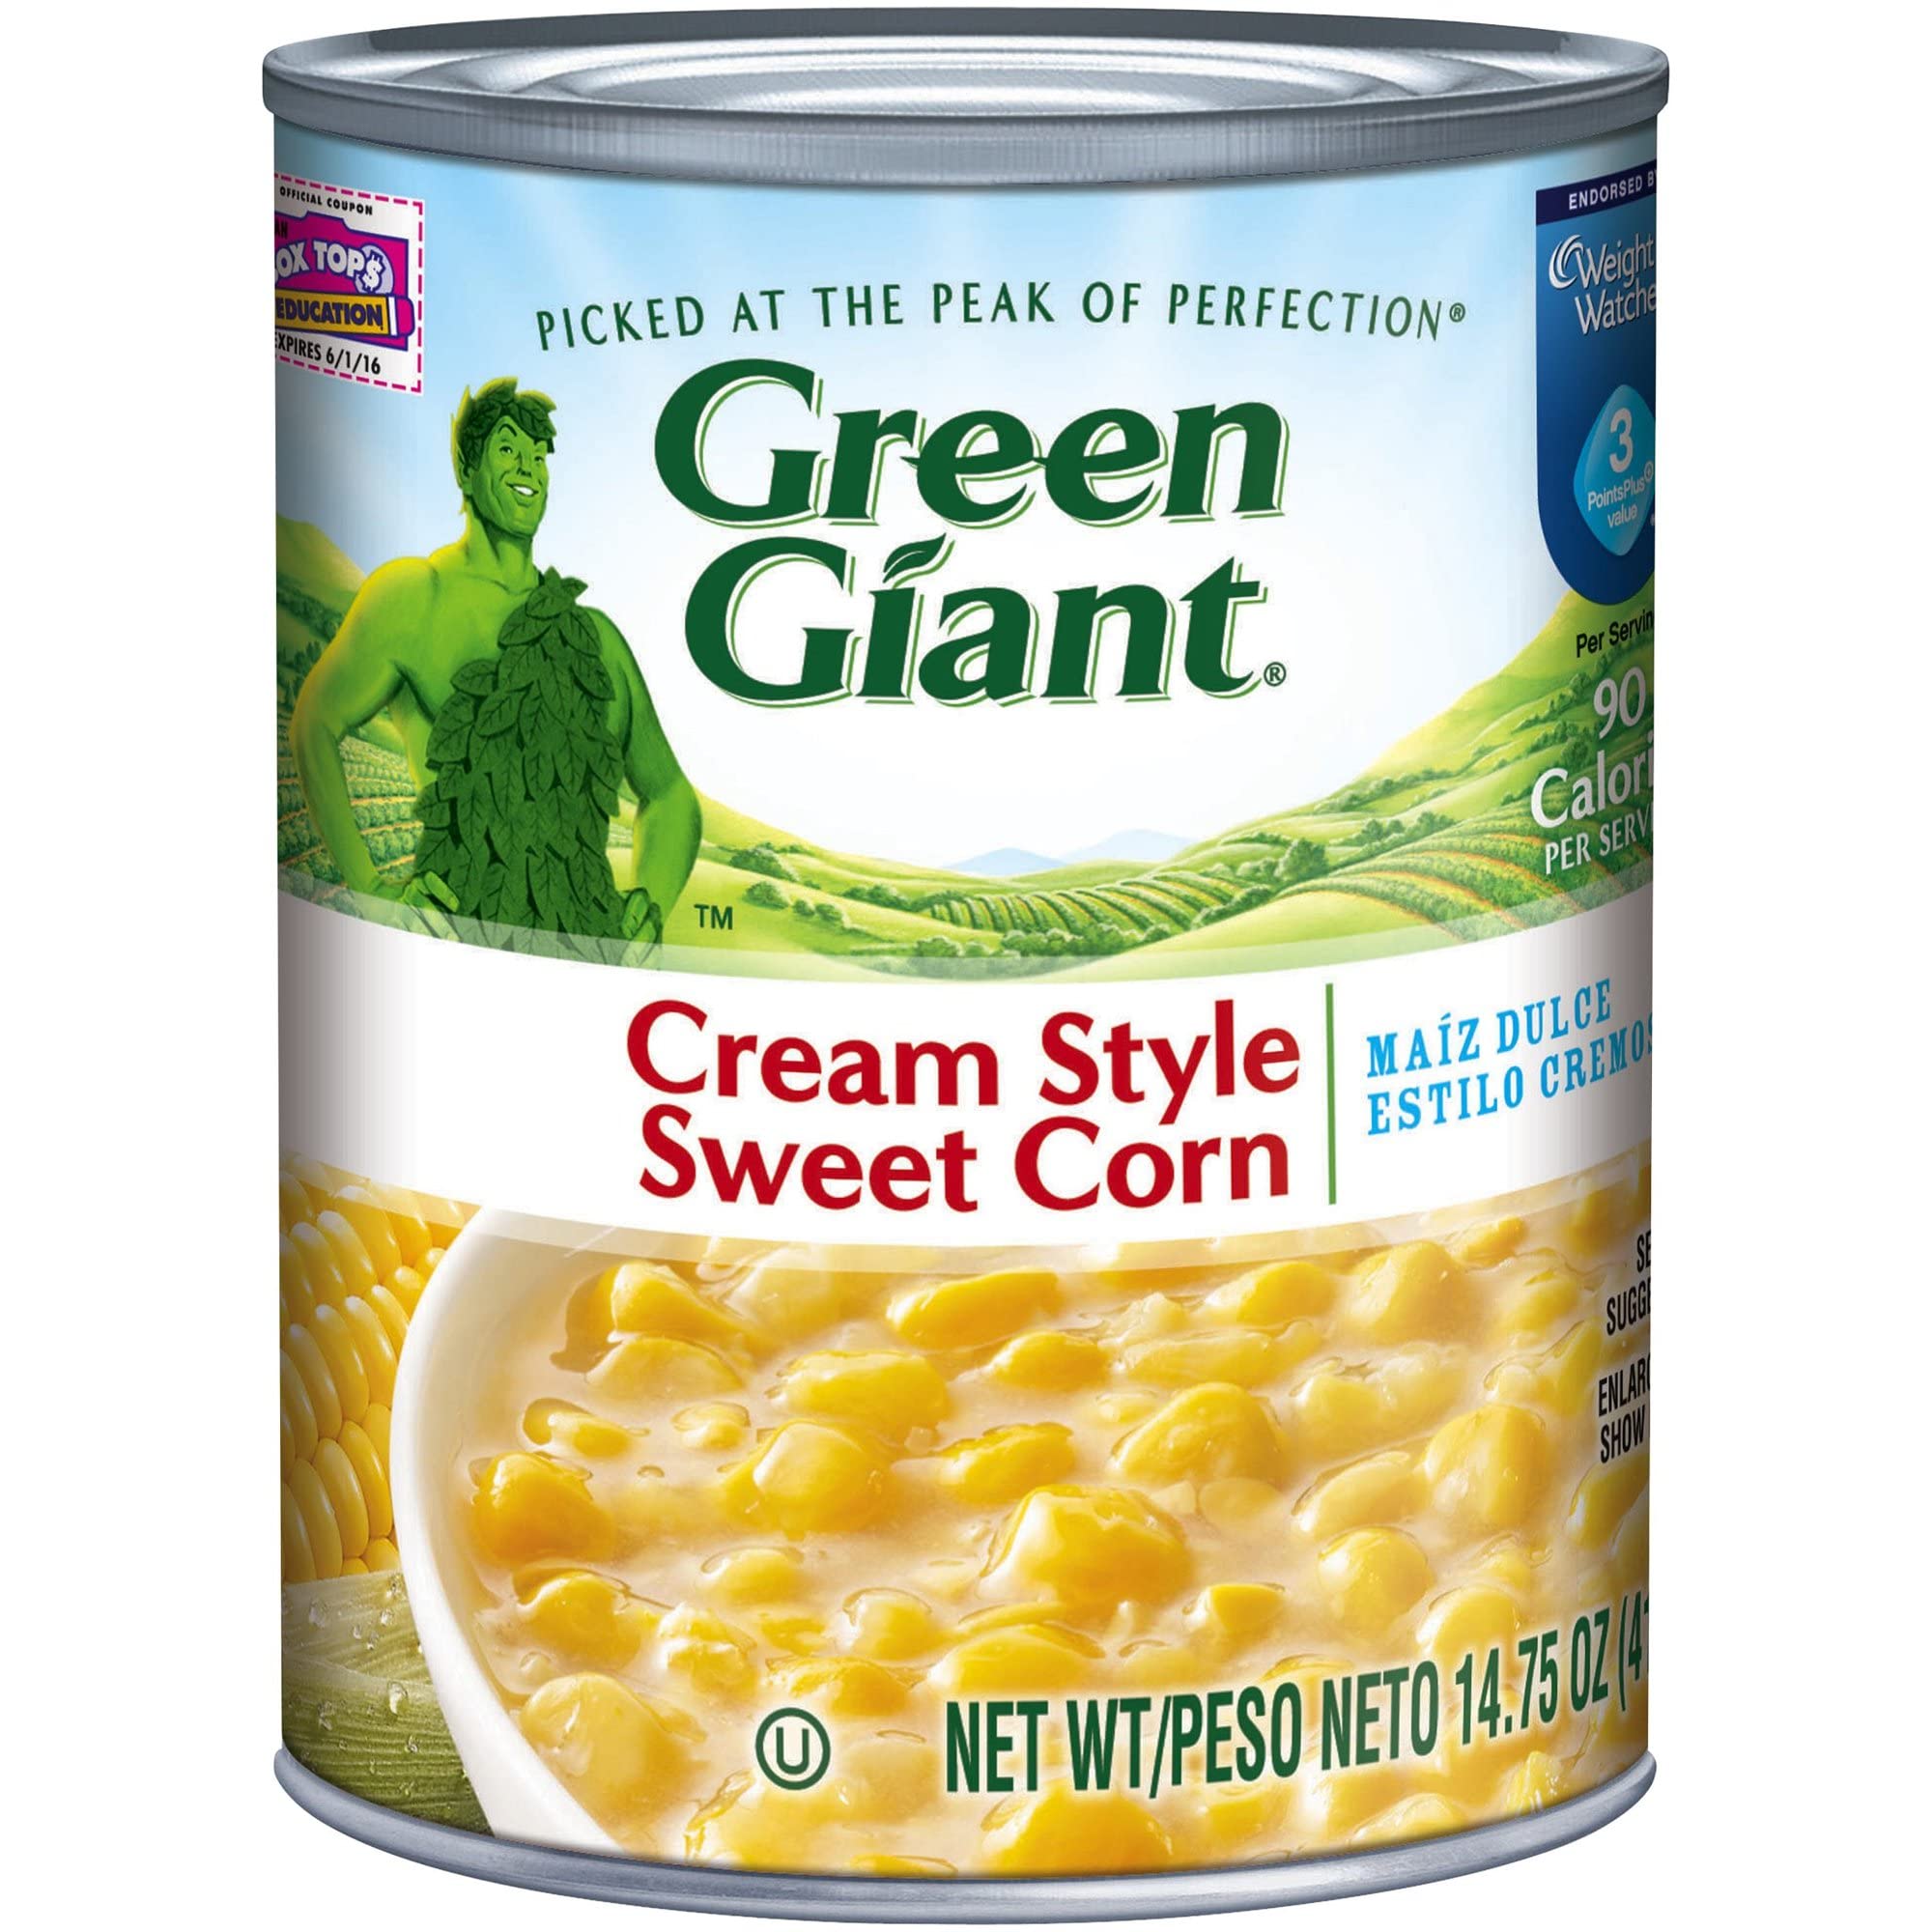 Green Giant Cream Style Sweet Corn, 14.75 Ounce Can~66 cents With S&S @ Amazon~Free Prime Shipping!